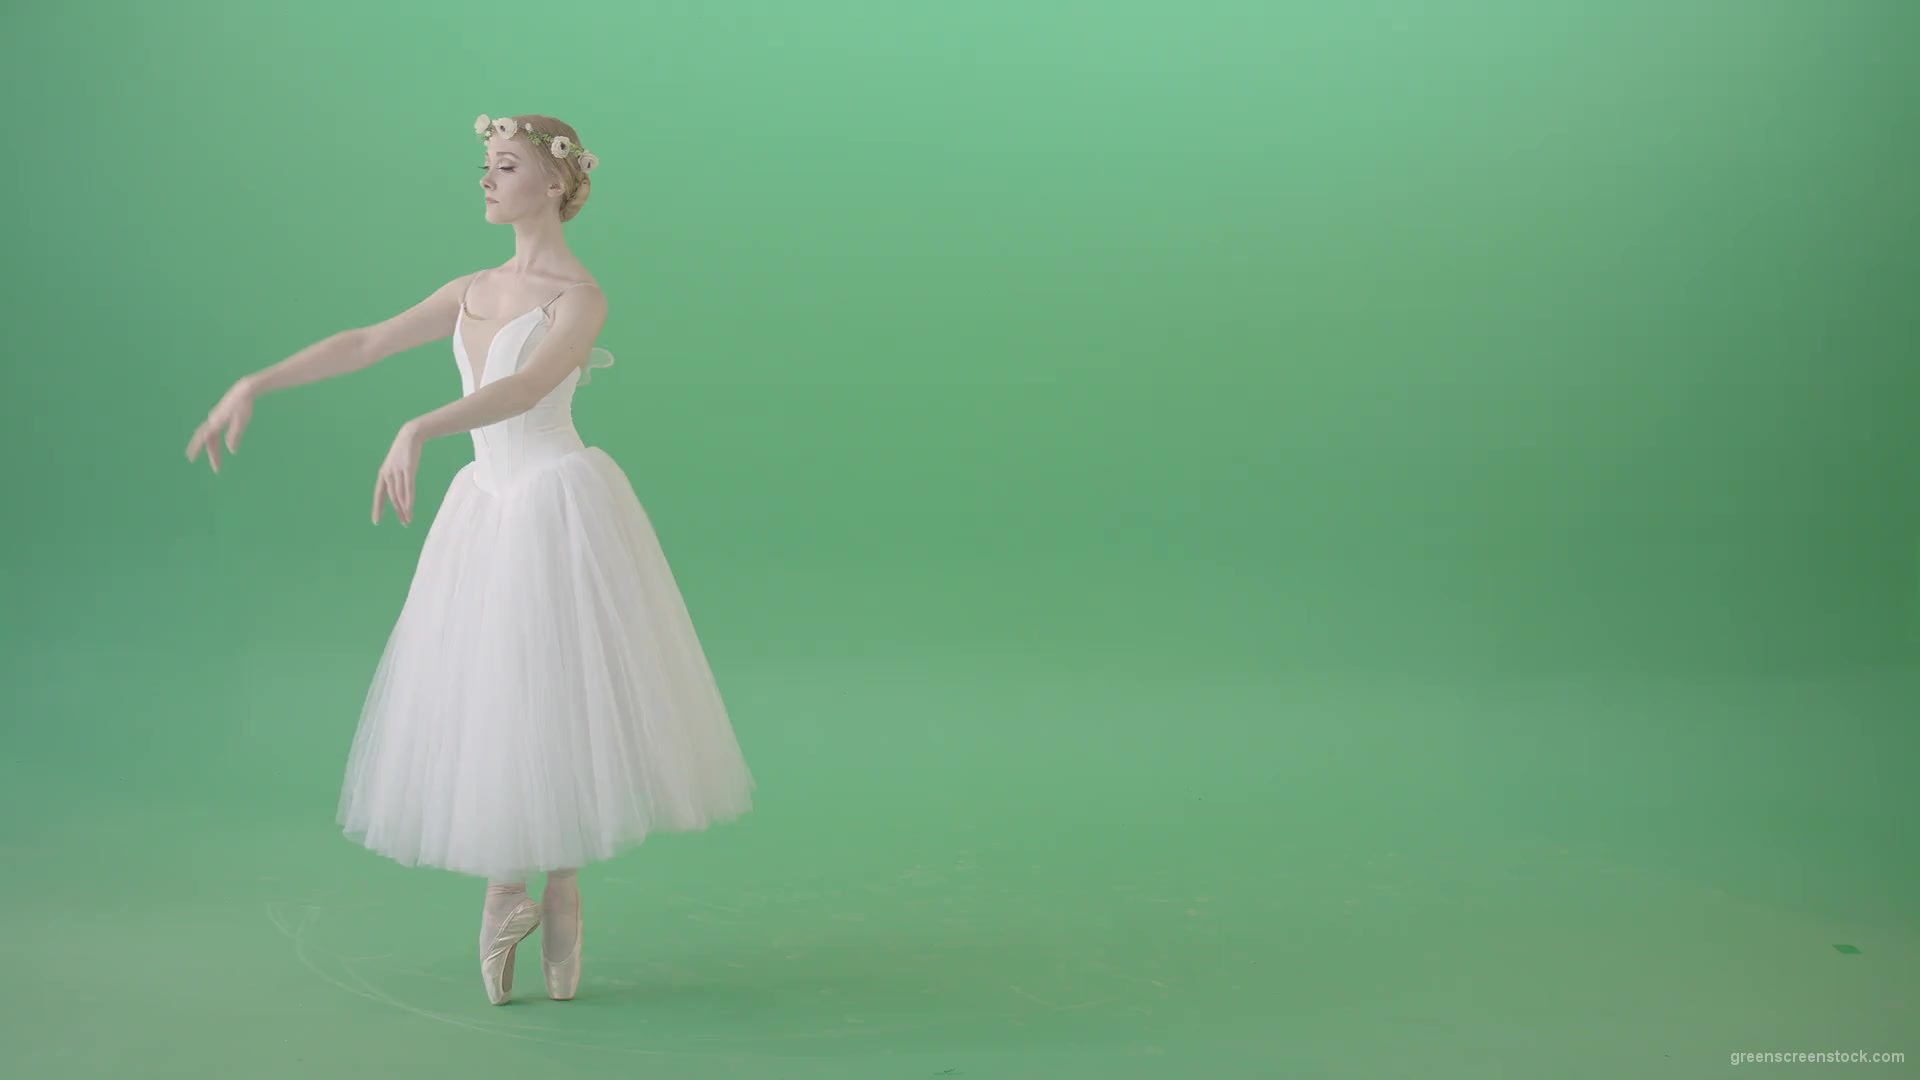 Blonde-Girl-in-elegant-white-wedding-dress-mowing-away-and-dancing-ballet-art-isolated-on-green-screen-4K-Video-Footage-1920_001 Green Screen Stock